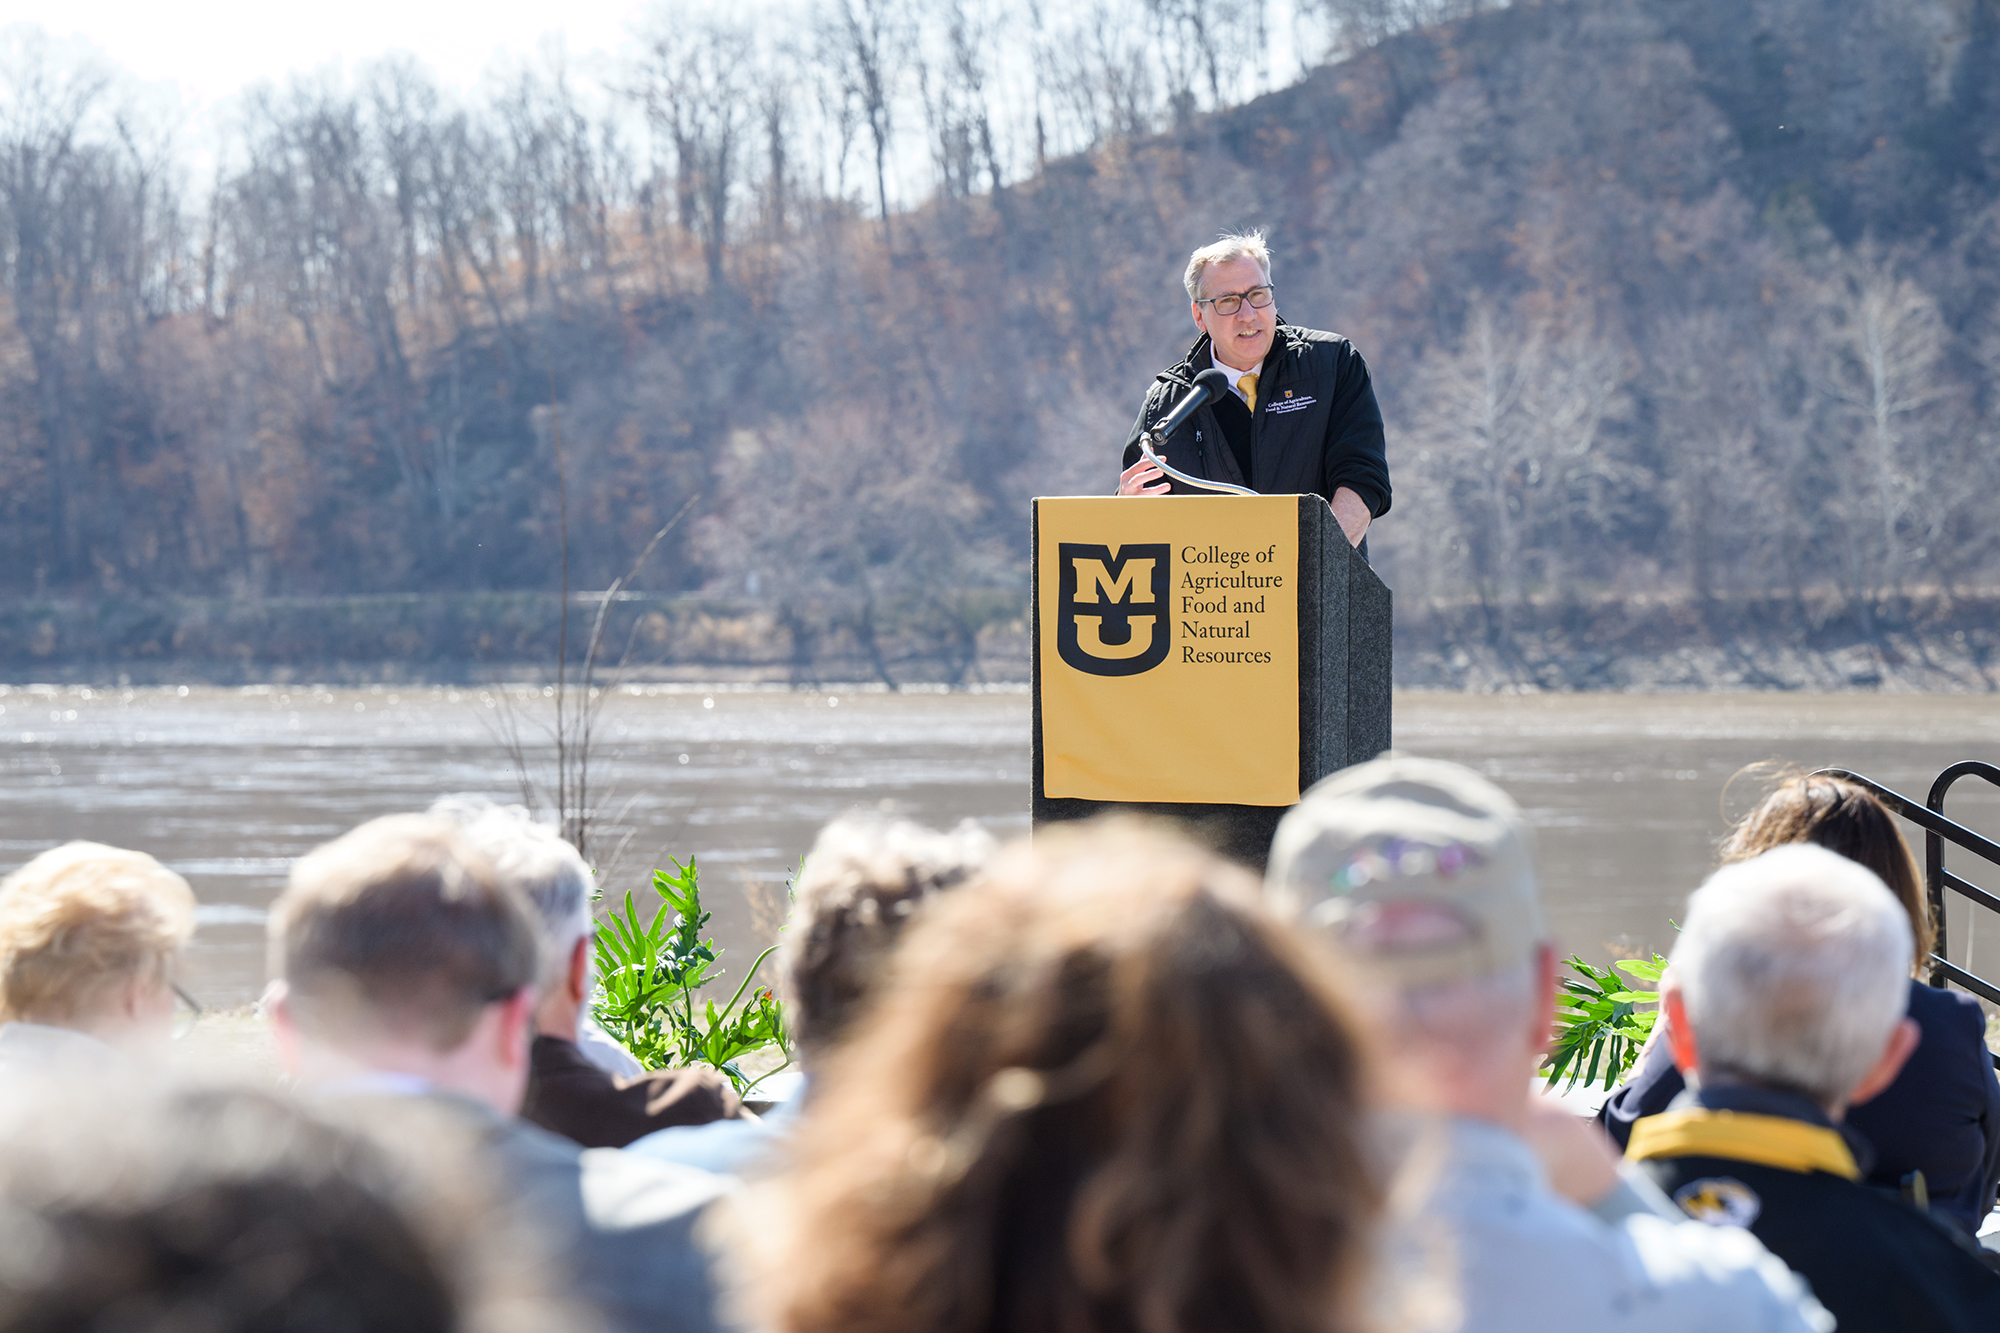 Christopher Daubert, vice chancellor and dean of the College of Agriculture, Food and Natural Resources, speaks during the gift announcement event.